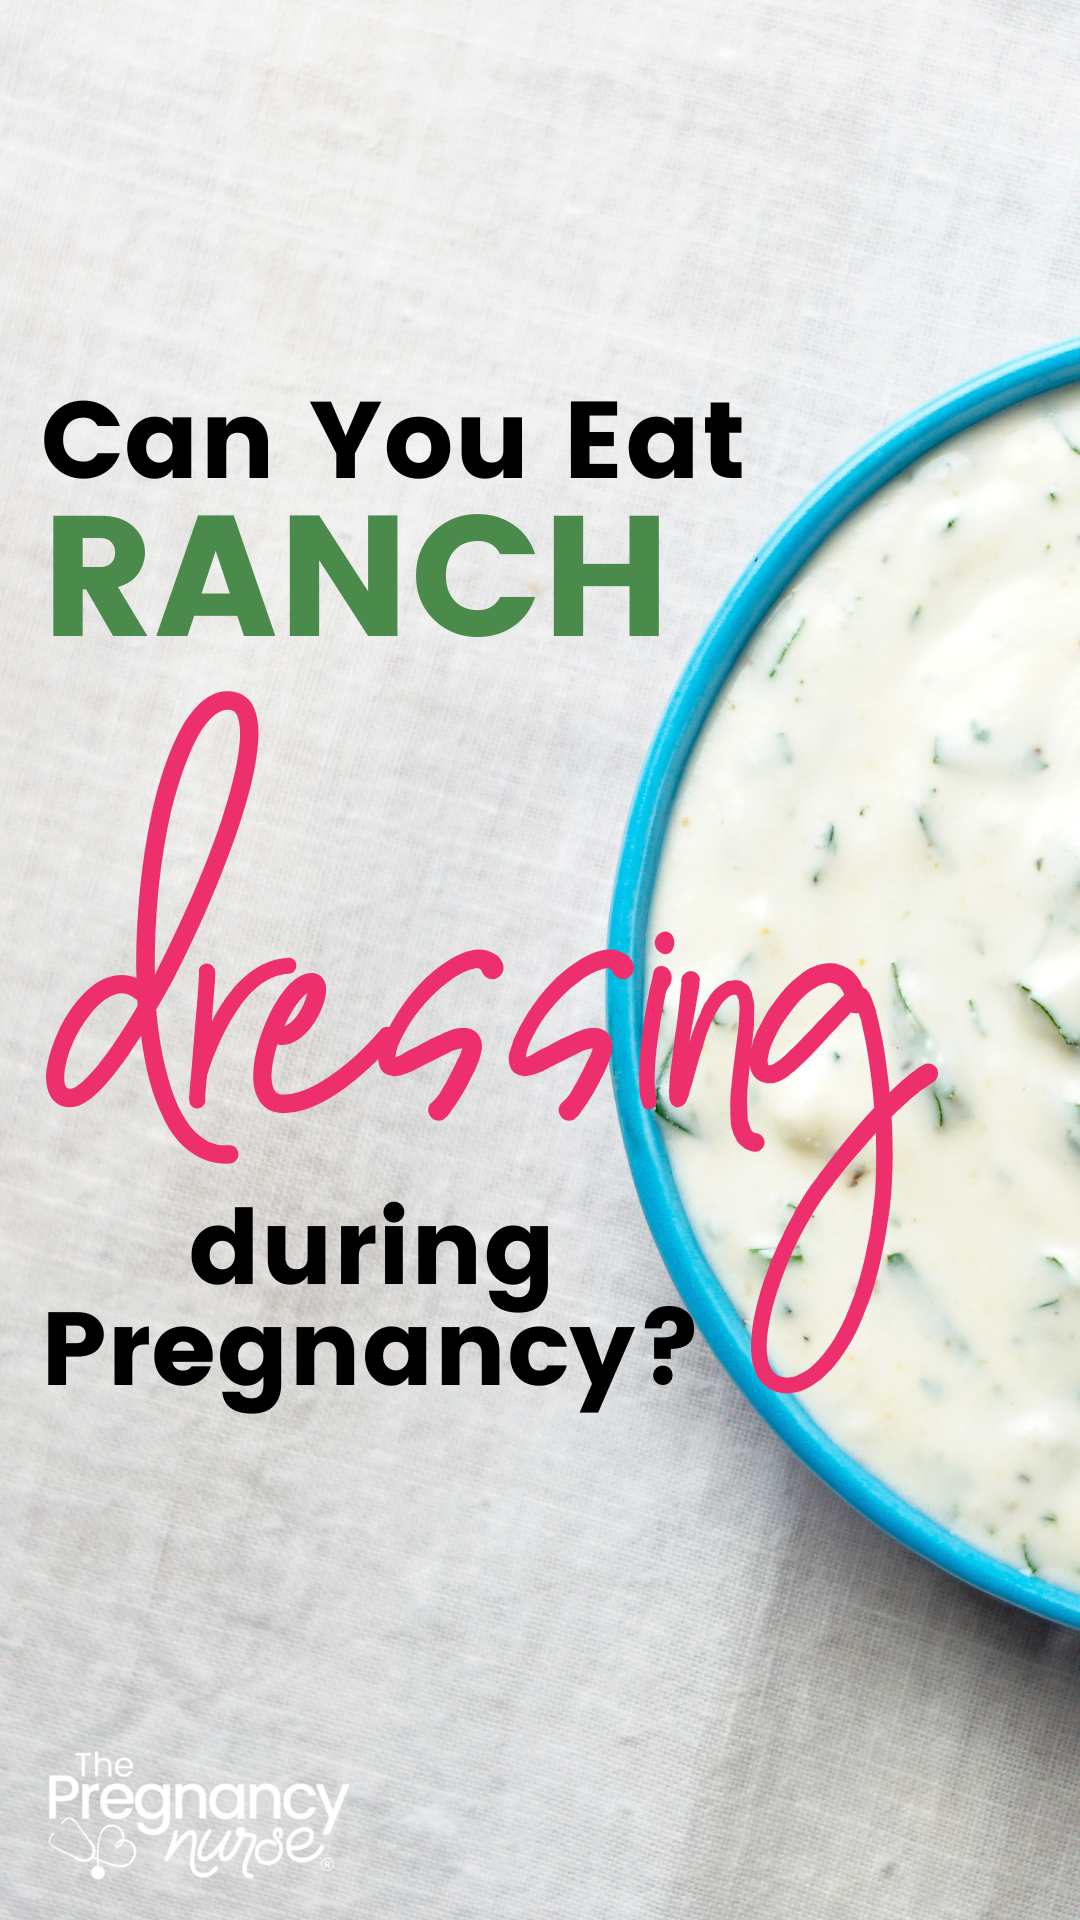 There's a lot of confusion about what pregnant women can and can't eat. So we asked the experts, and this is what they said about pregnant women eating ranch dressing.